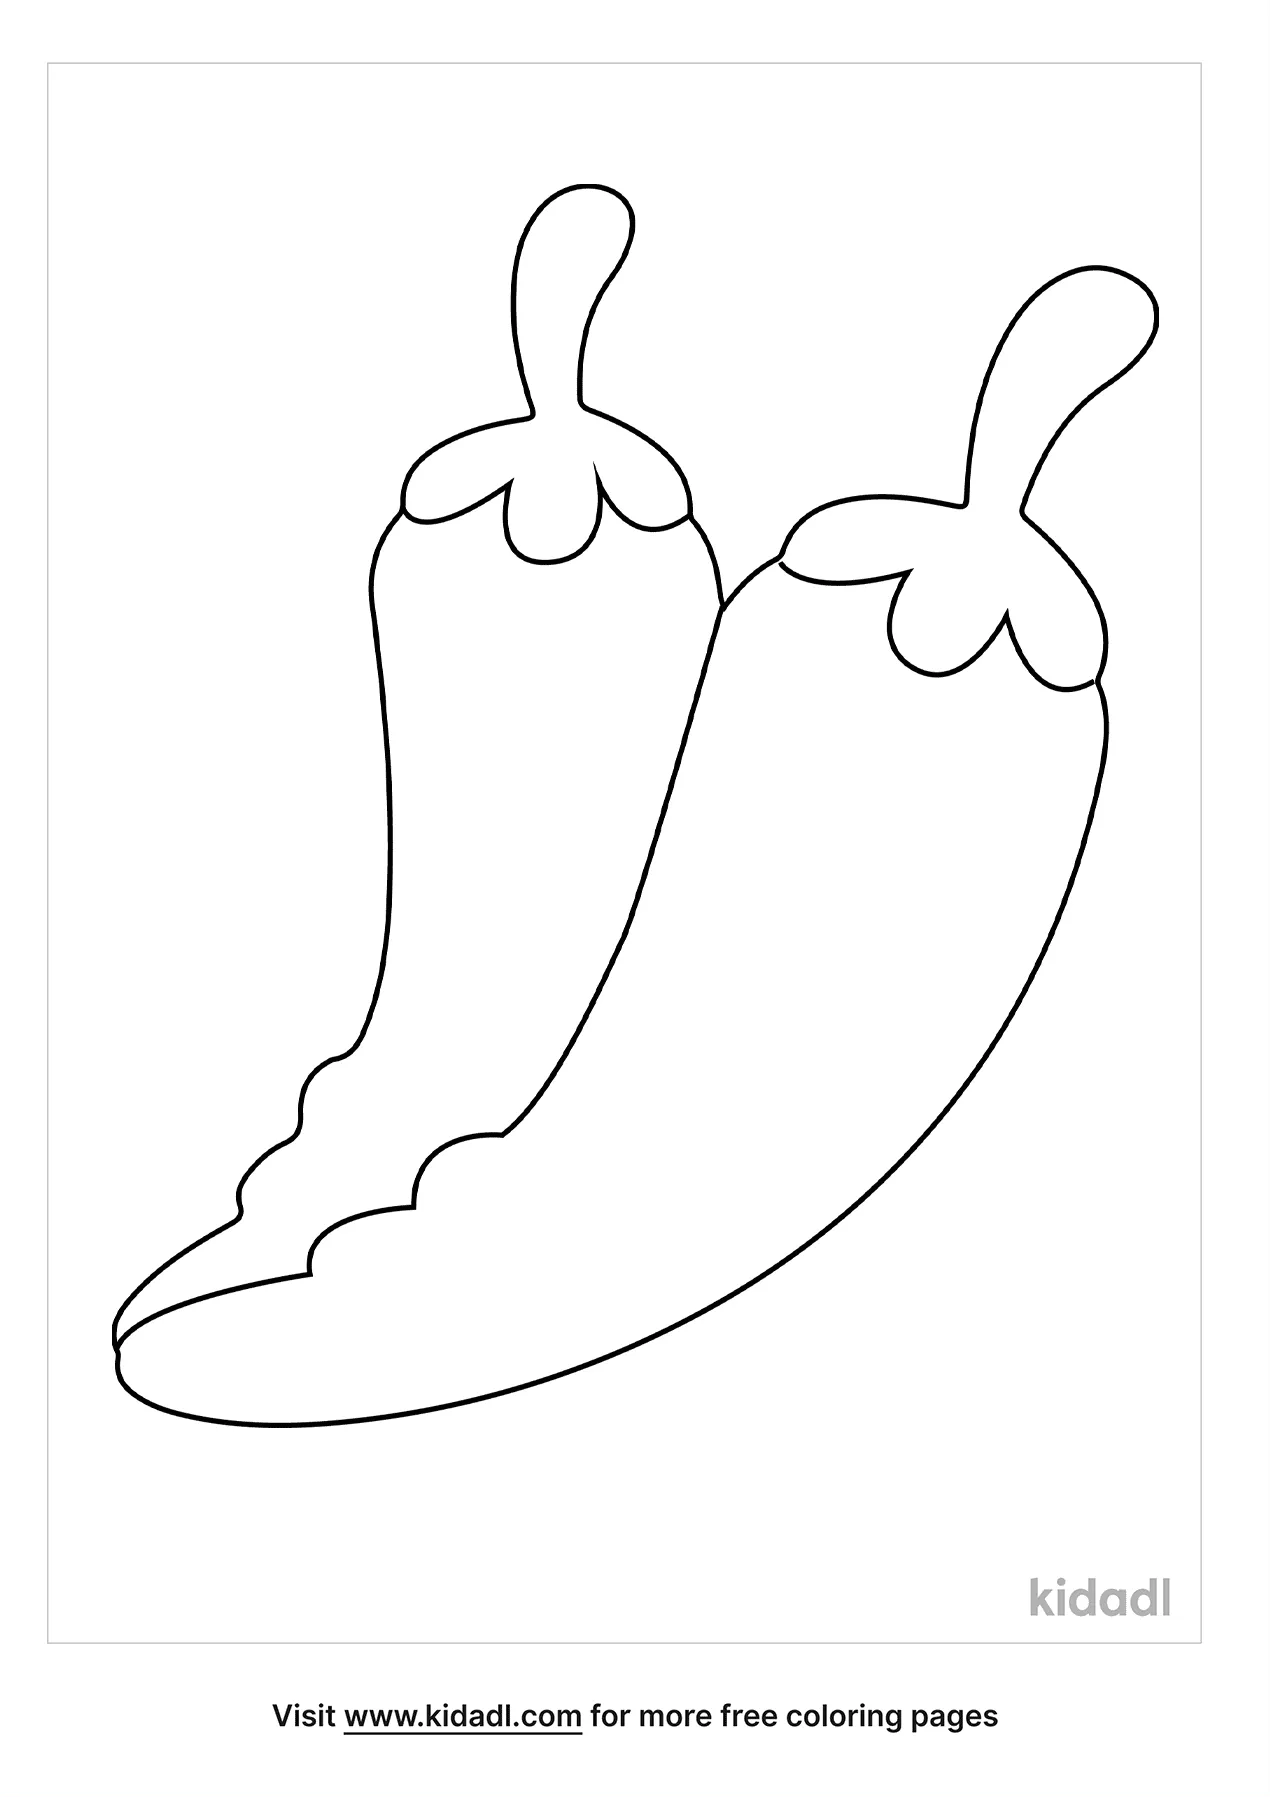 Jalapeno Coloring Page